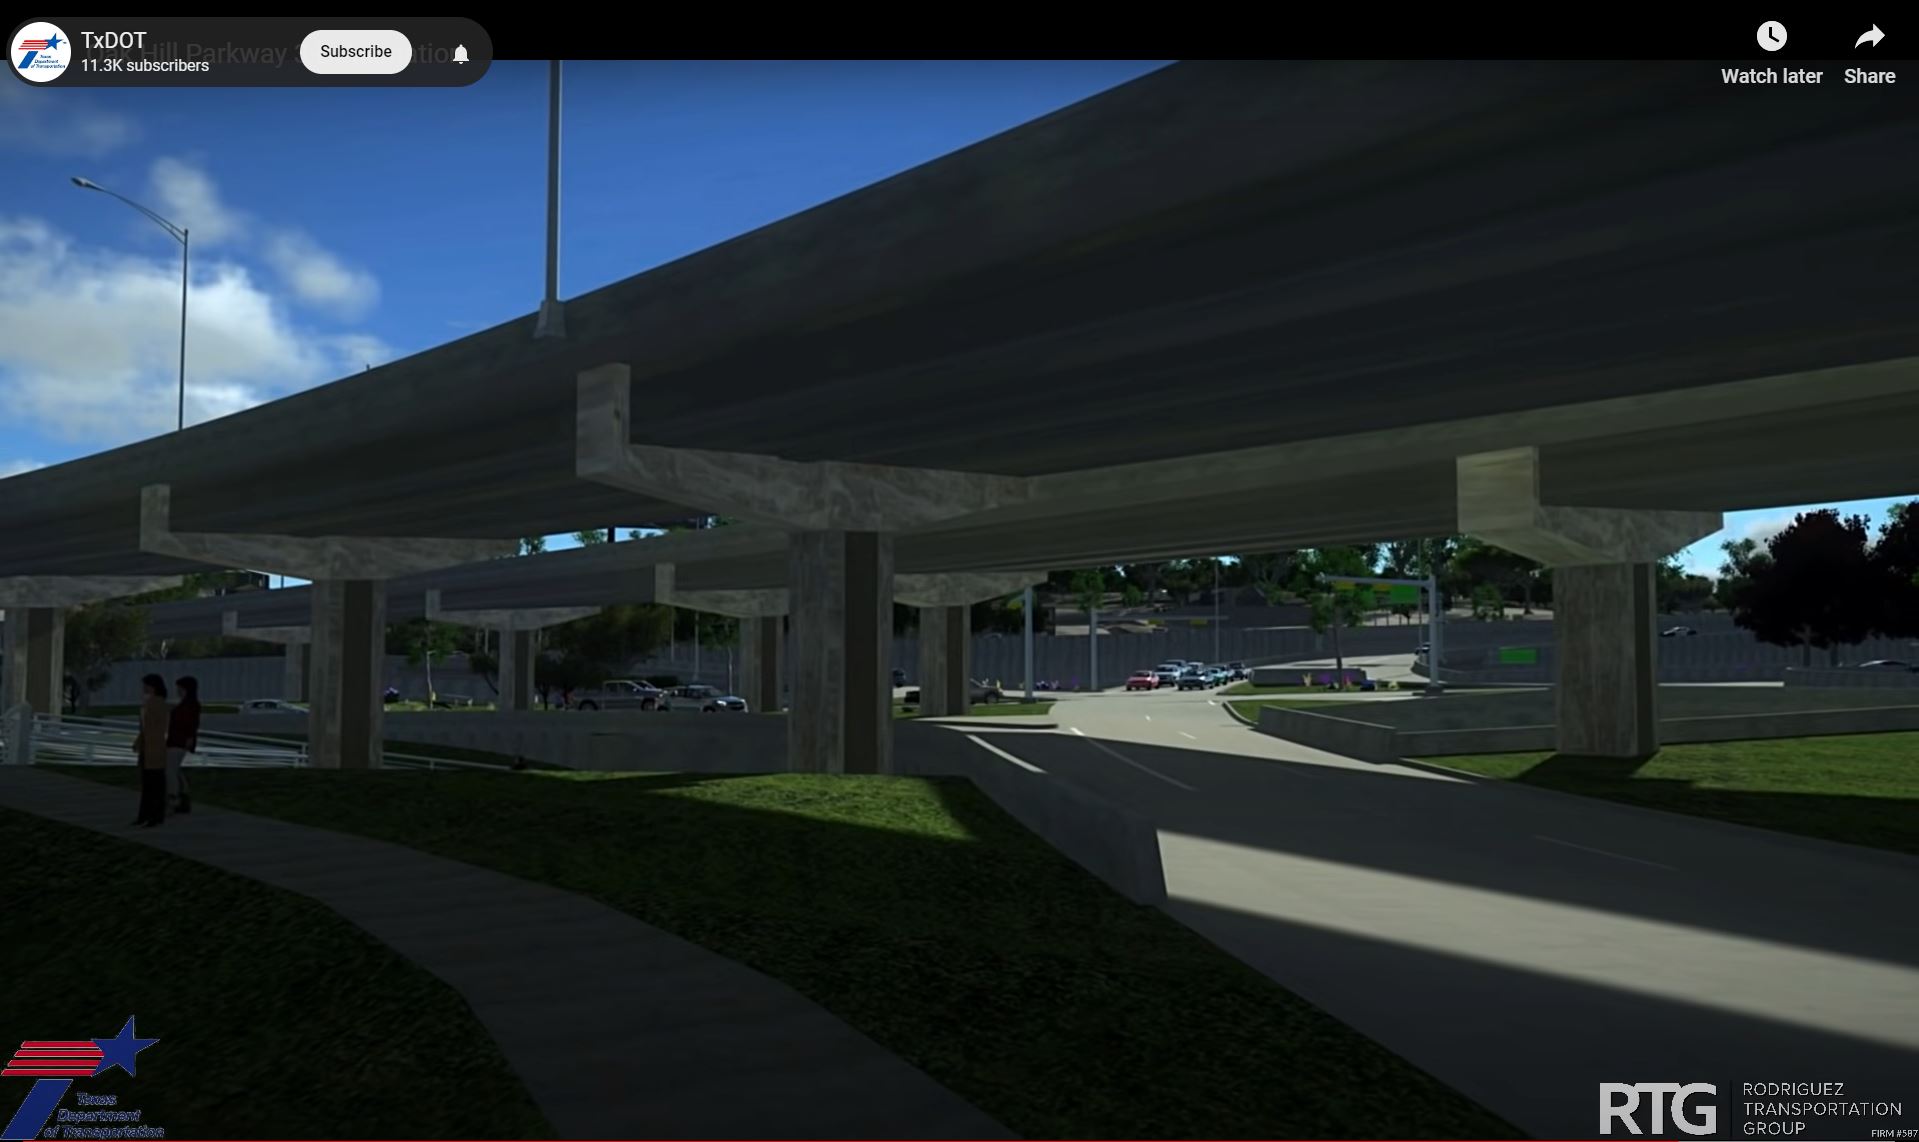 'Y' Interchange at Ground Level, Looking South